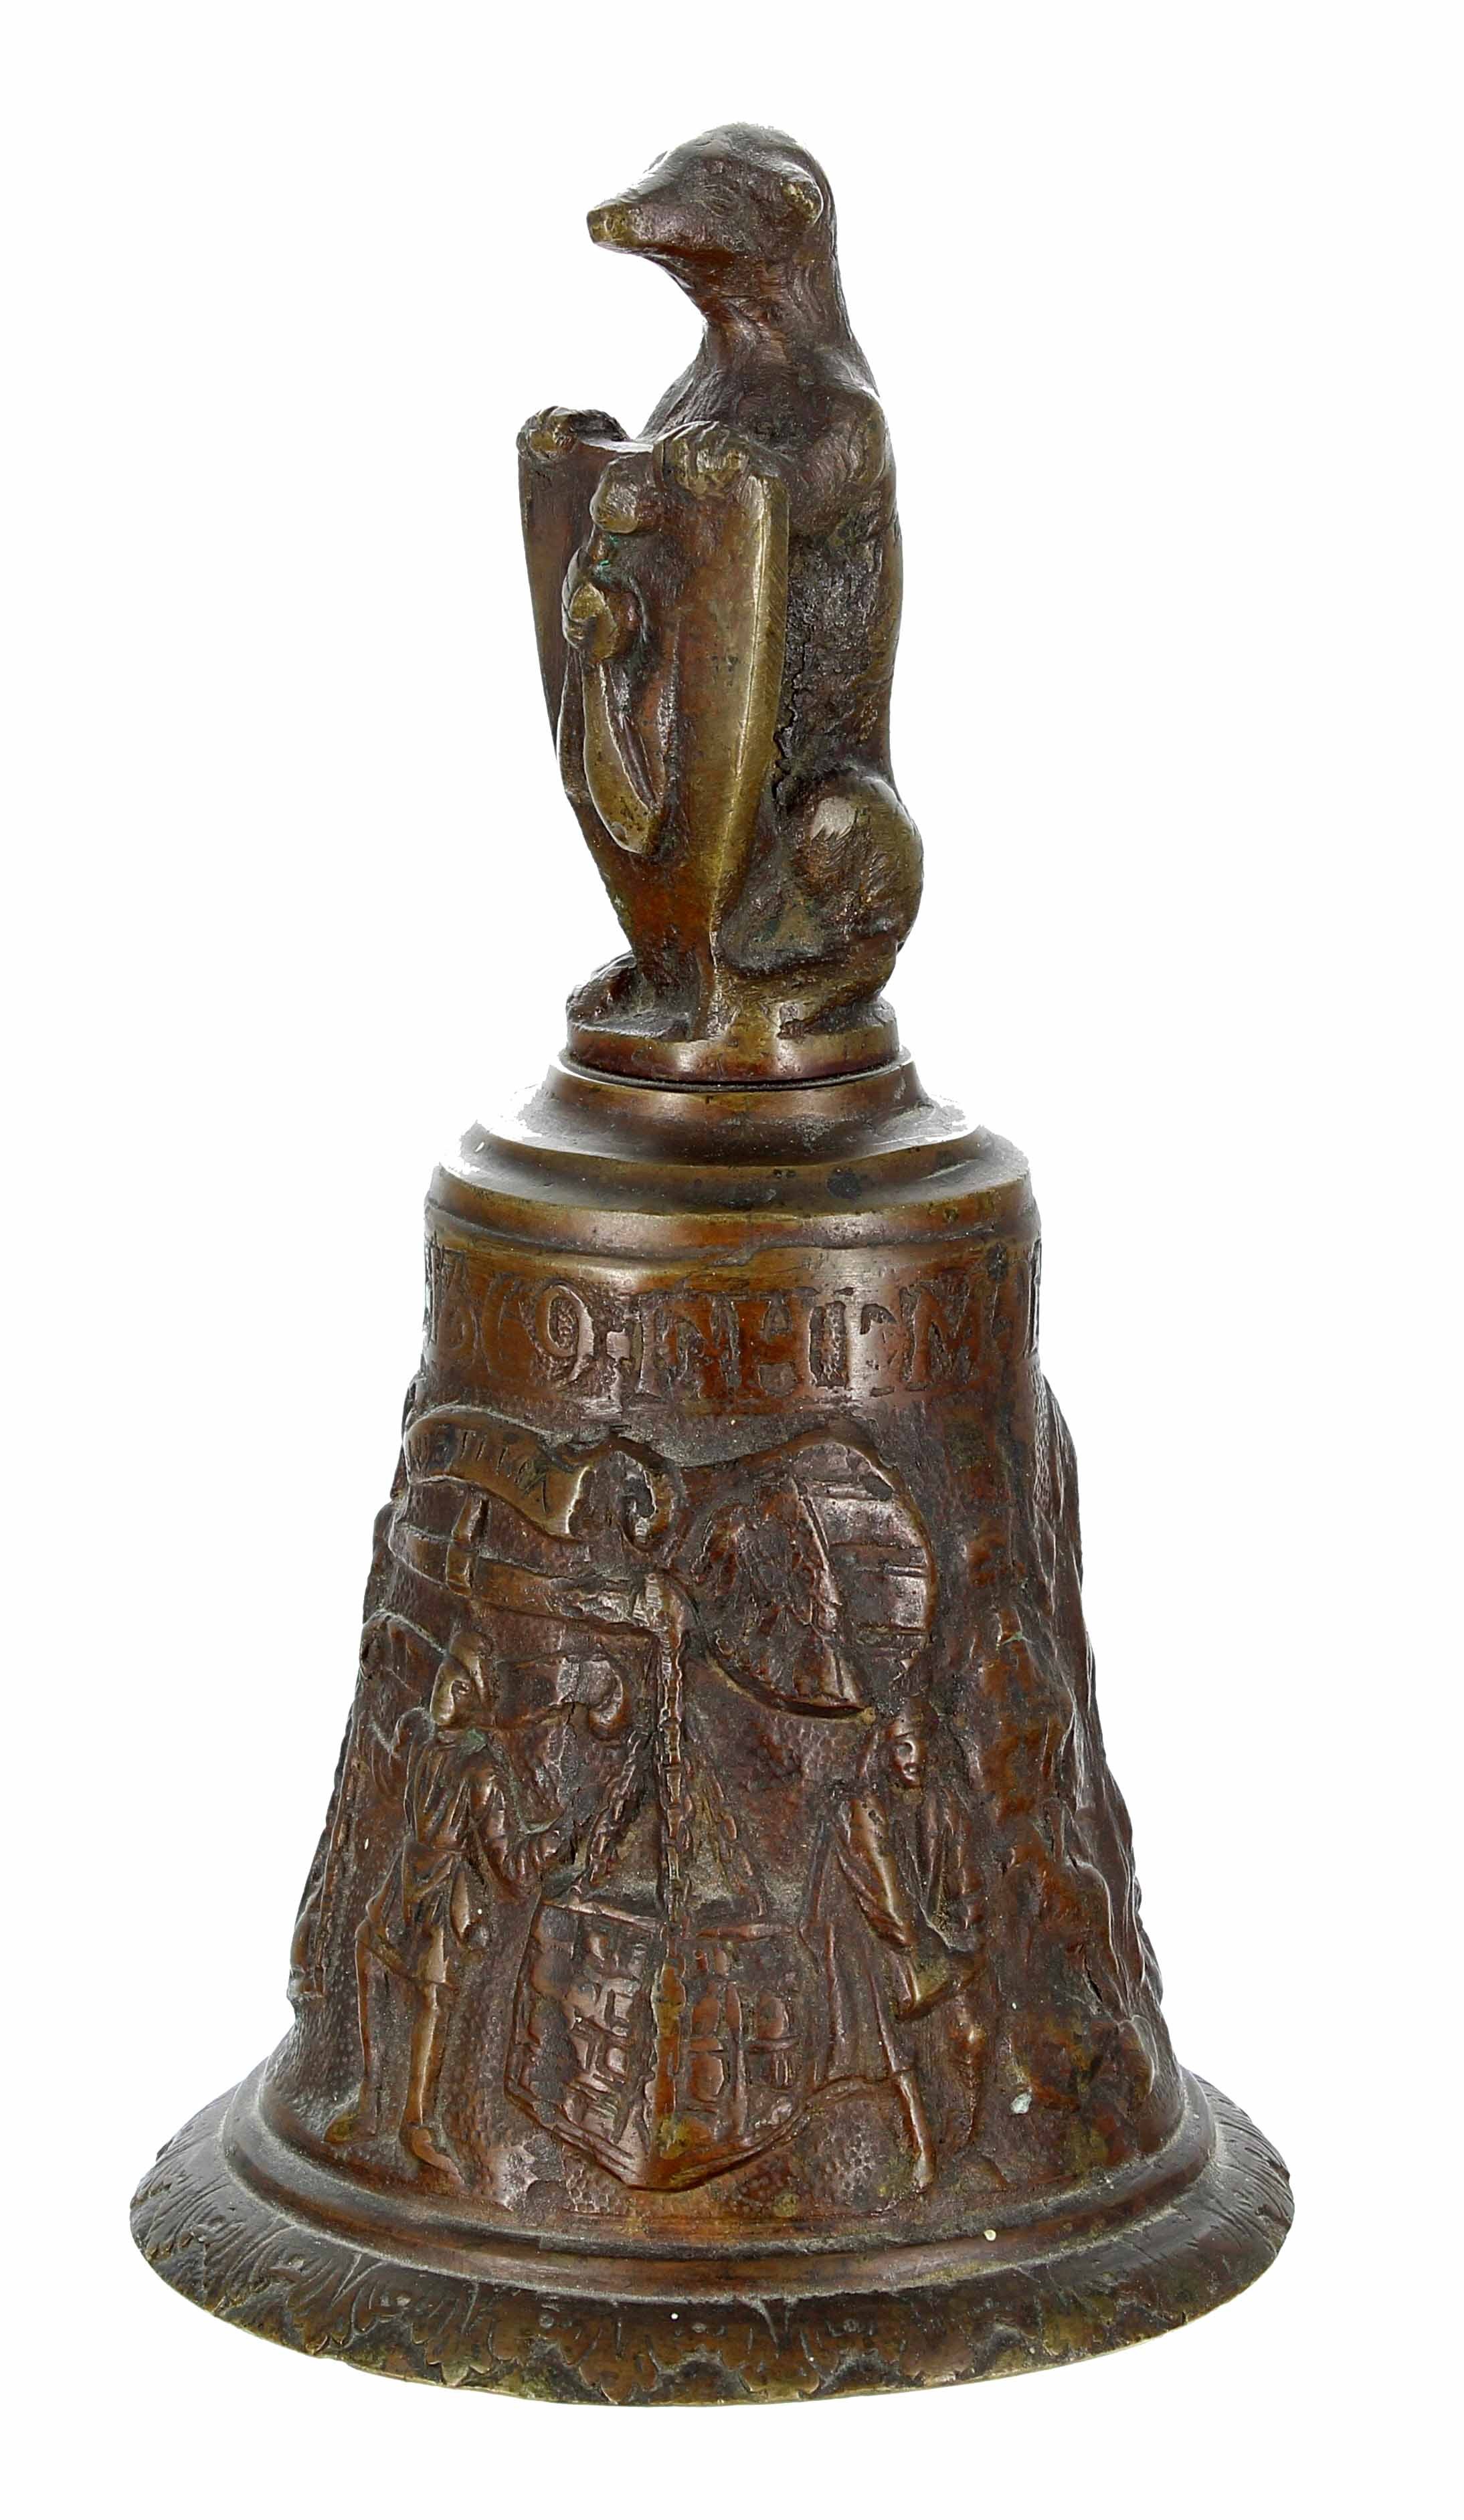 Antique style cast bronze table bell, cast with a figural scene under the text banner 'F.HEMONY-ME-